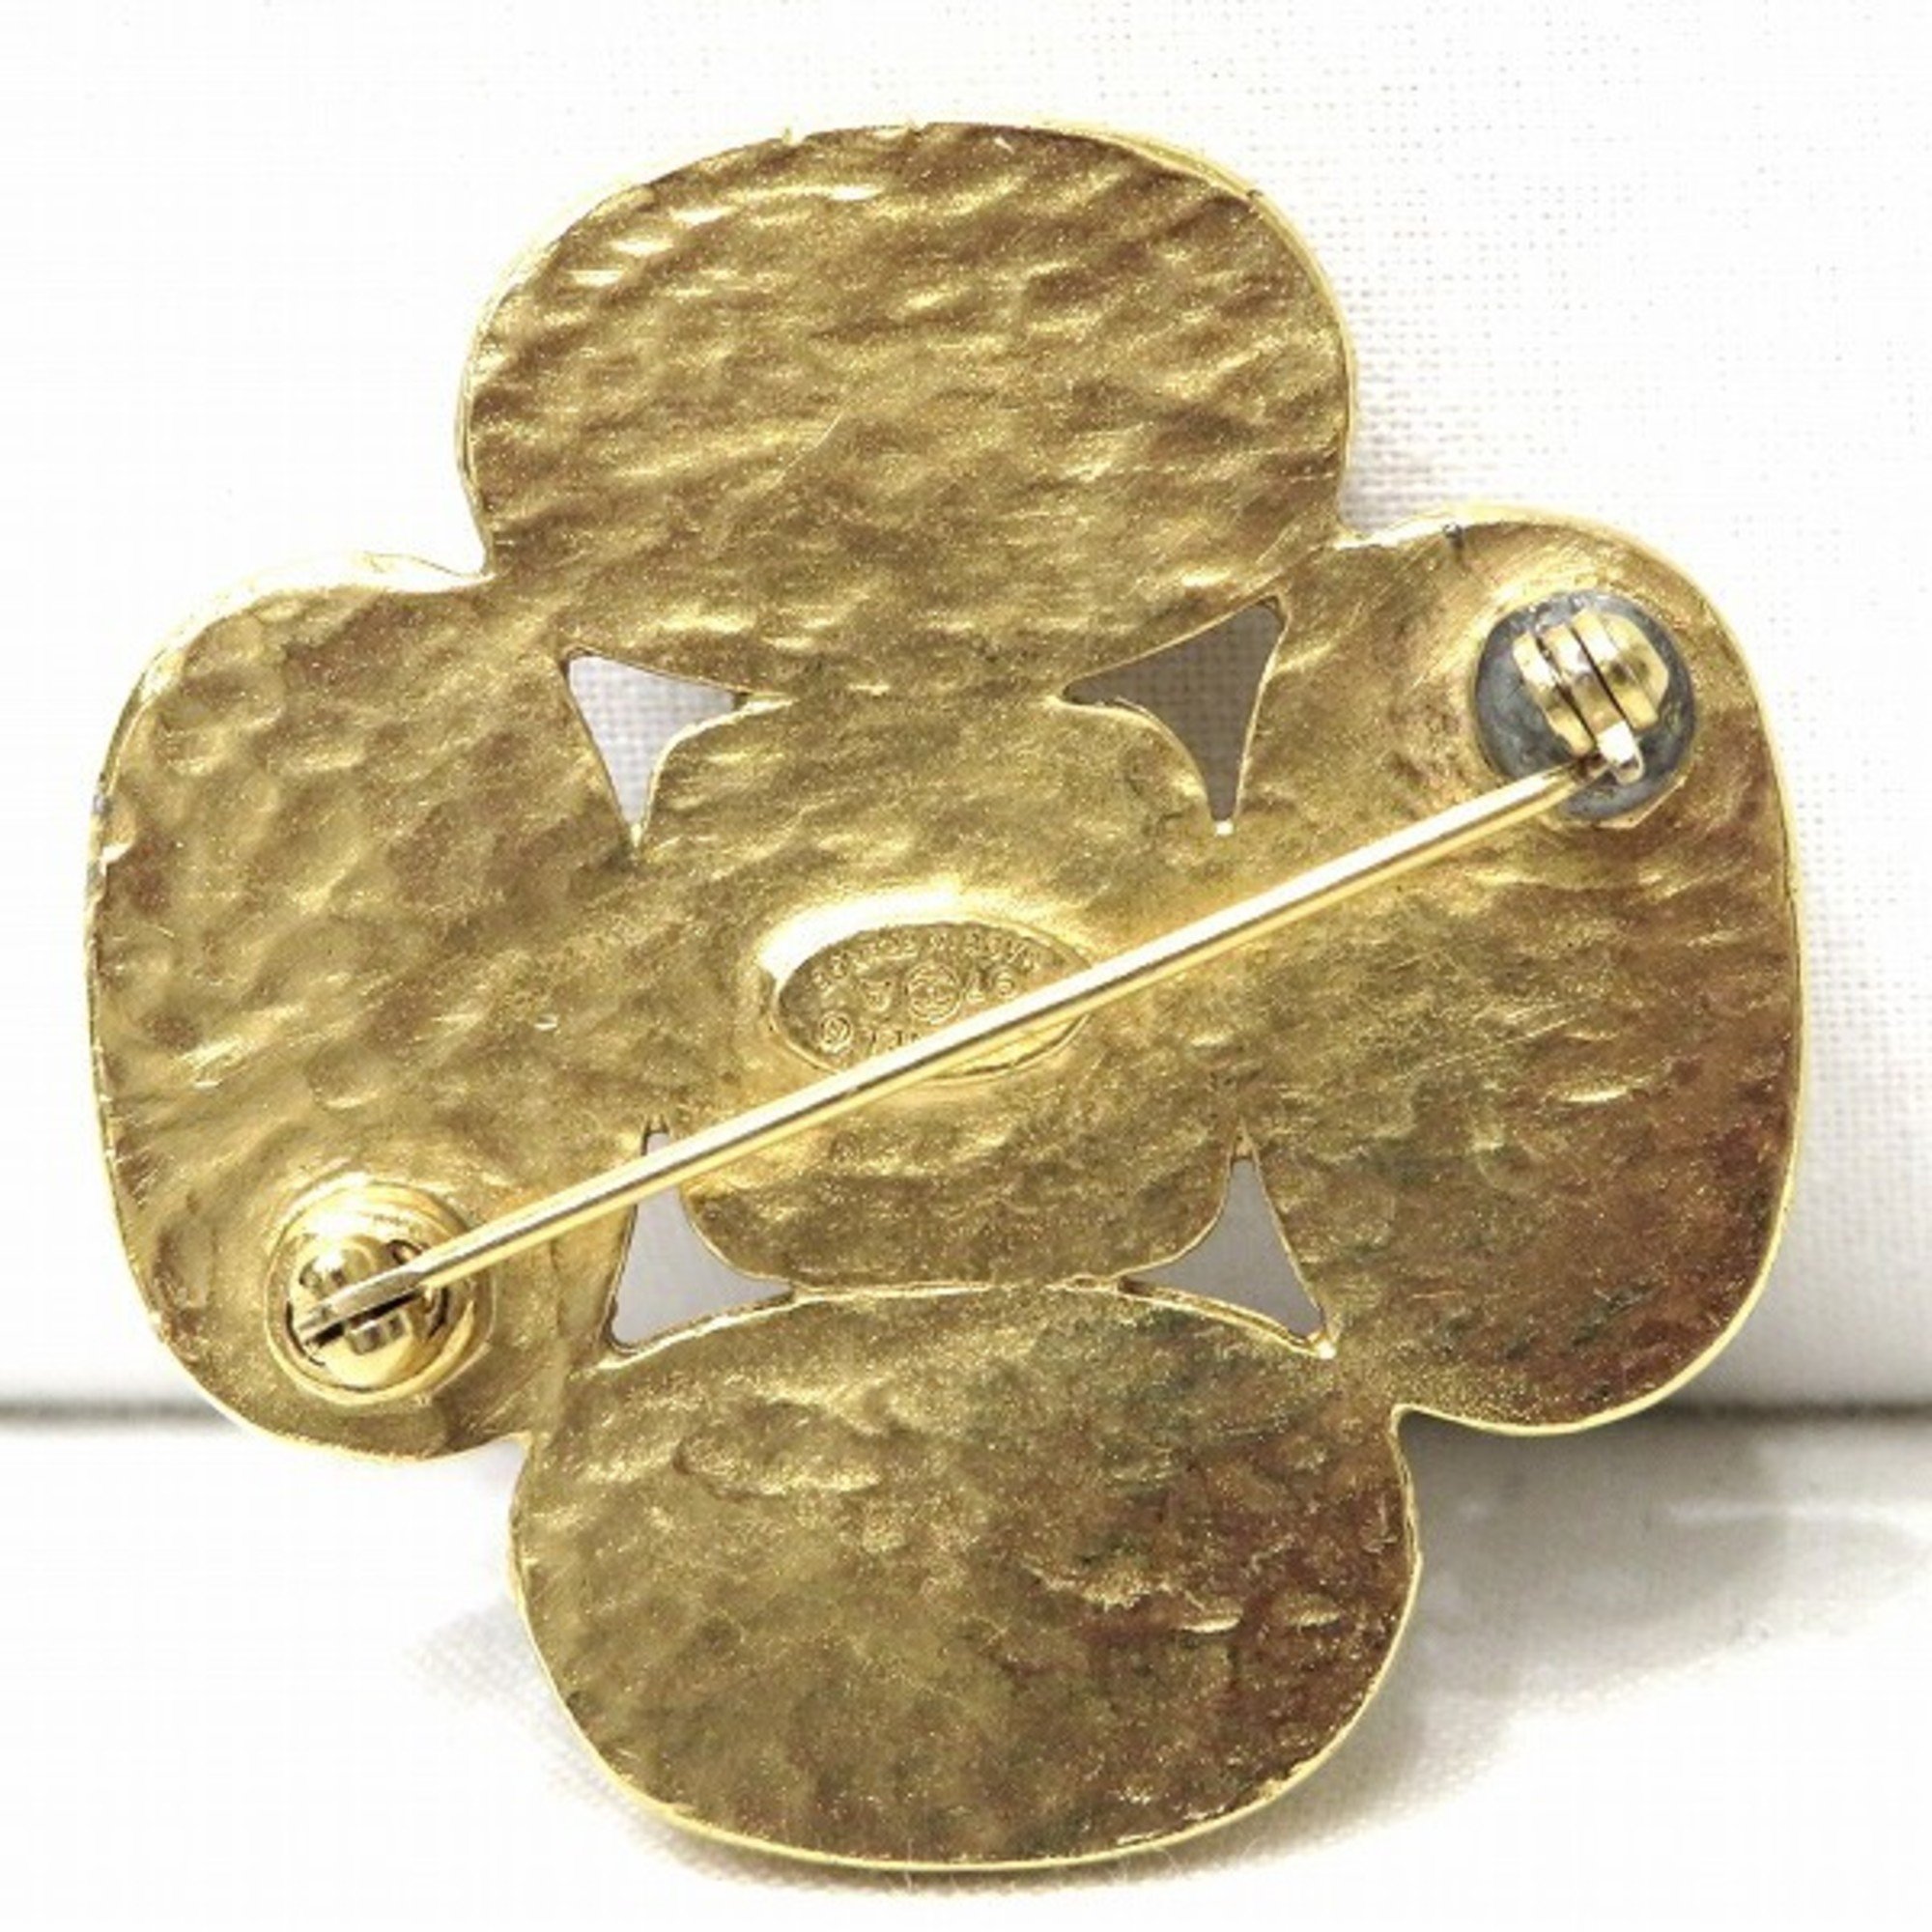 CHANEL Cocomark Stone 97A Gold Vintage Brand Accessory Brooch Ladies